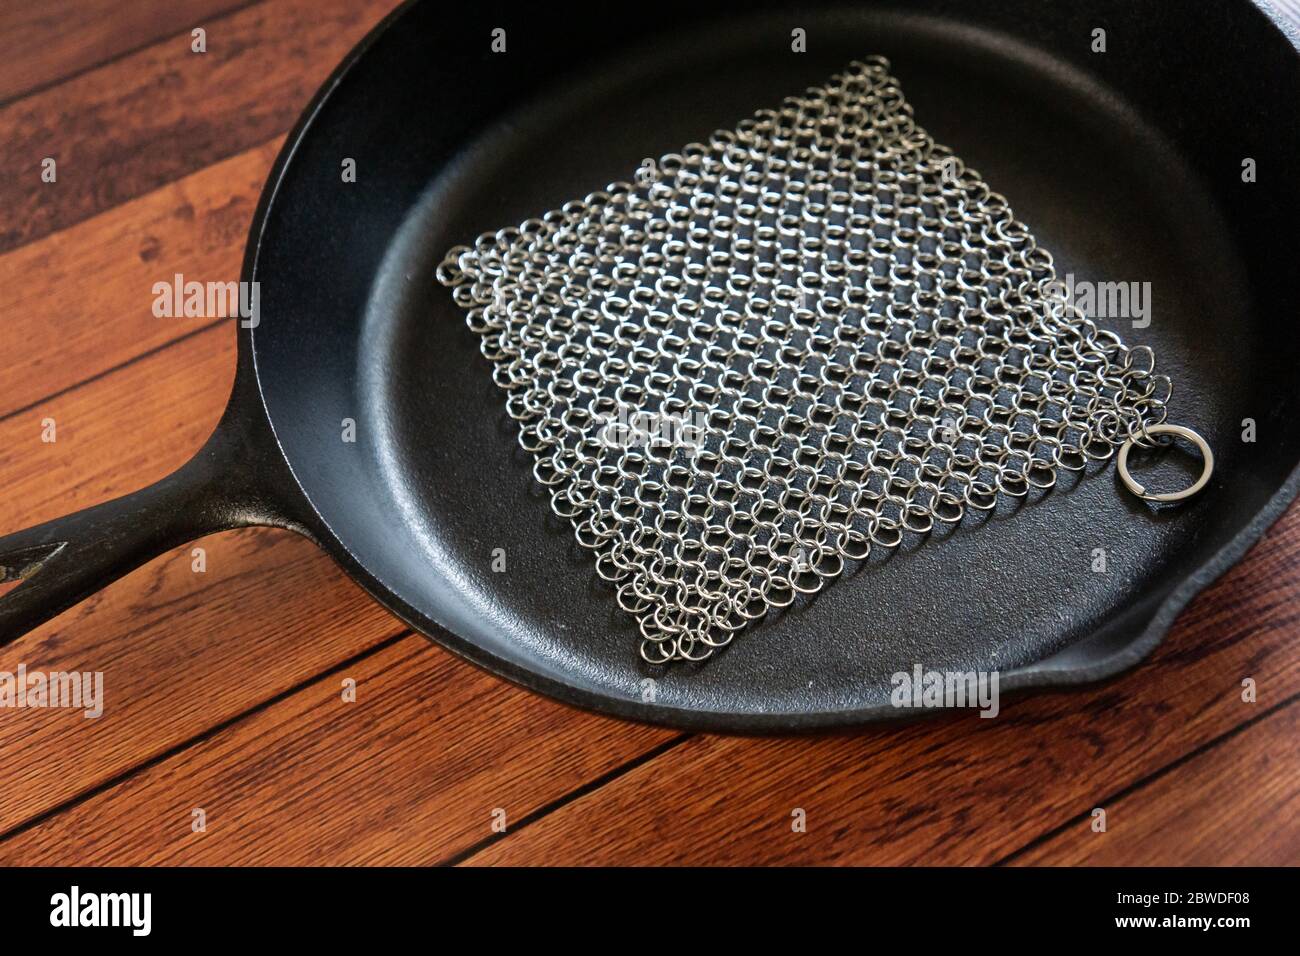 https://c8.alamy.com/comp/2BWDF08/small-ring-chainmail-scrubber-for-cast-iron-stainless-steel-hard-anodized-cookware-and-other-pots-pans-for-for-cast-iron-cookware-dutch-ovens-2BWDF08.jpg